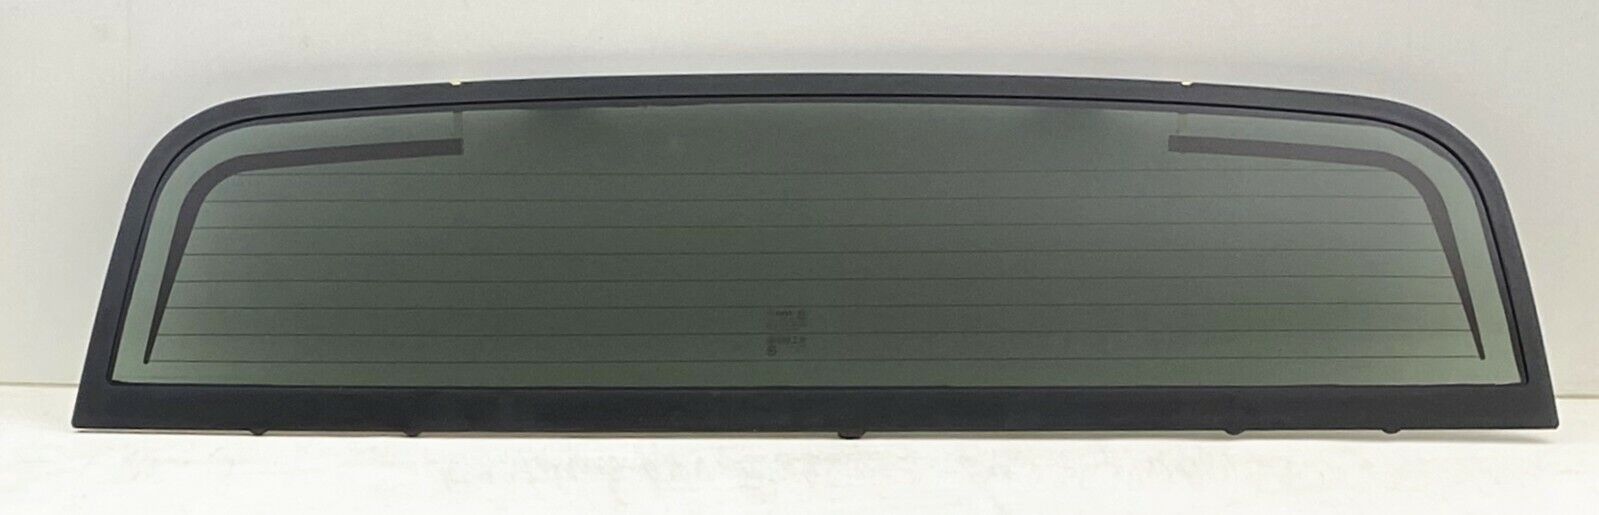 Fits 2002-2013 Escalade EXT & Avalanche Rear Back Window Glass Heated NEW